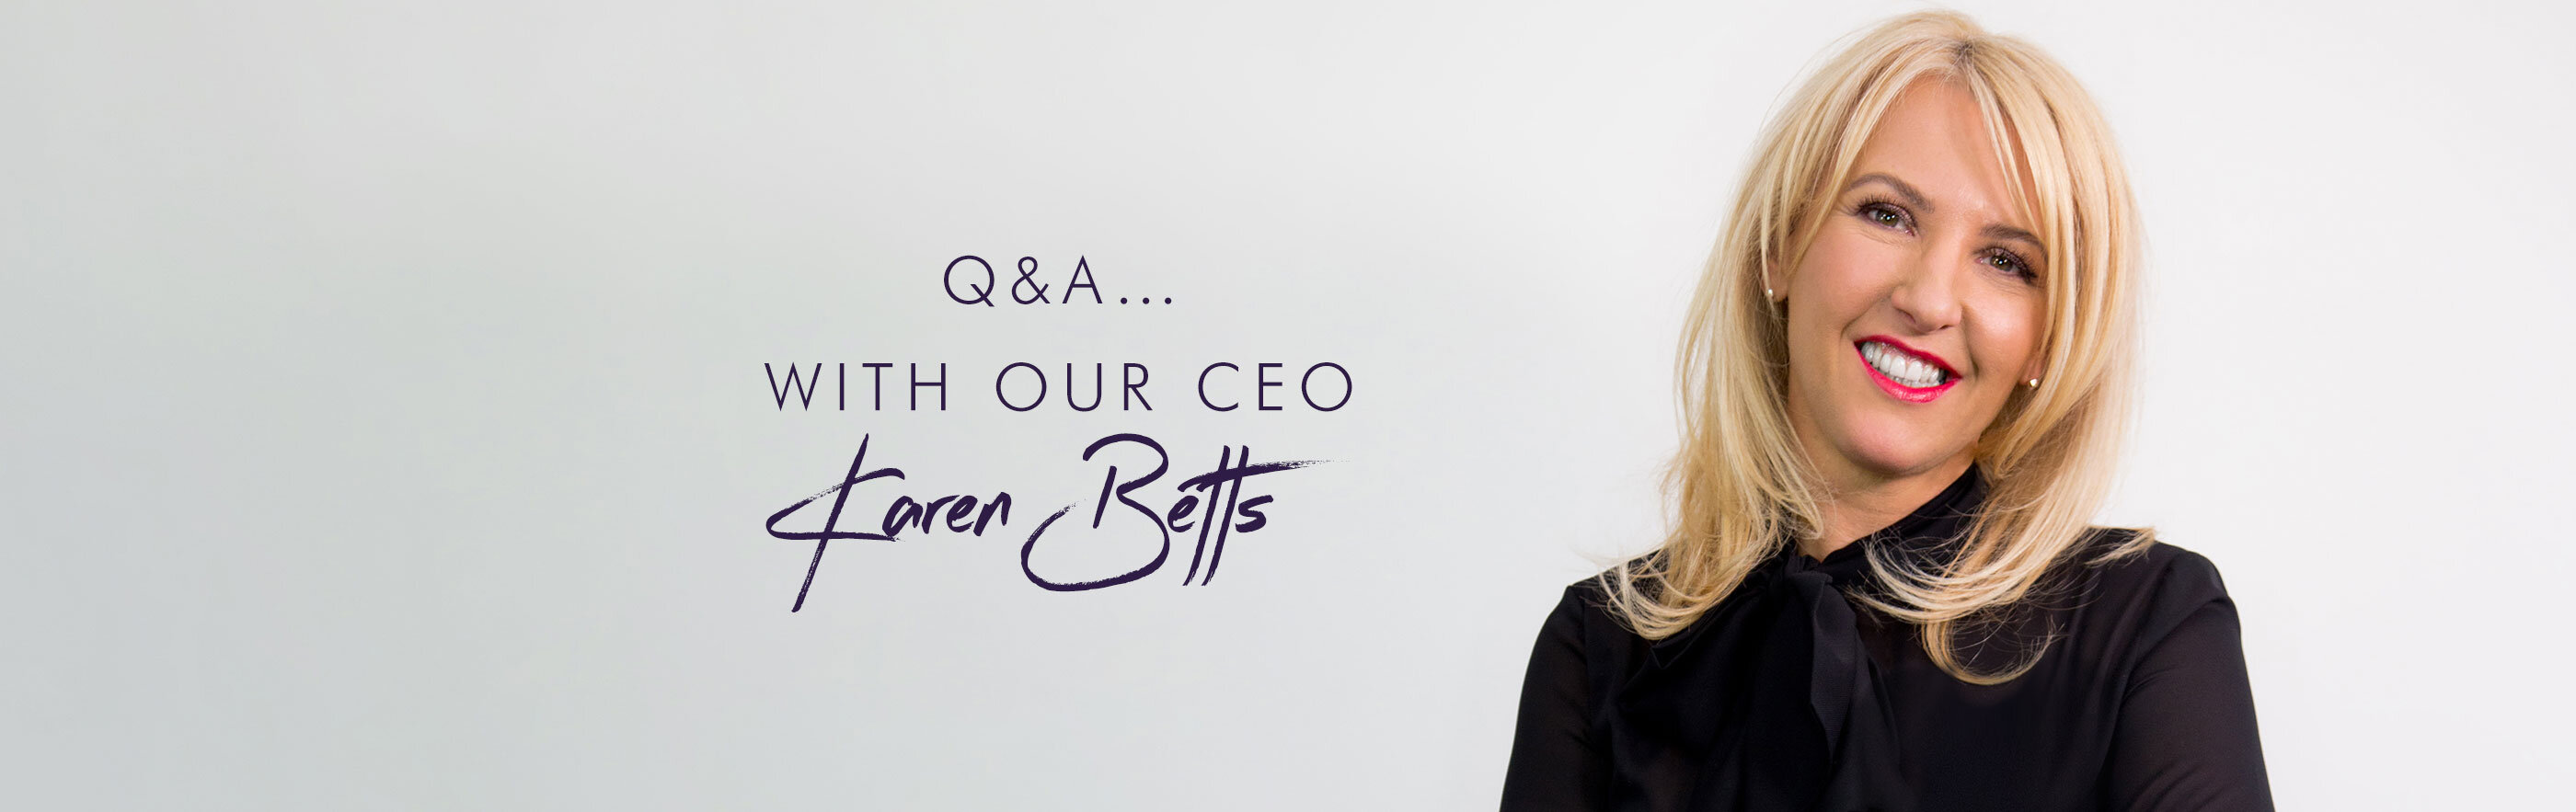 A Q&A… with our CEO Karen Betts!